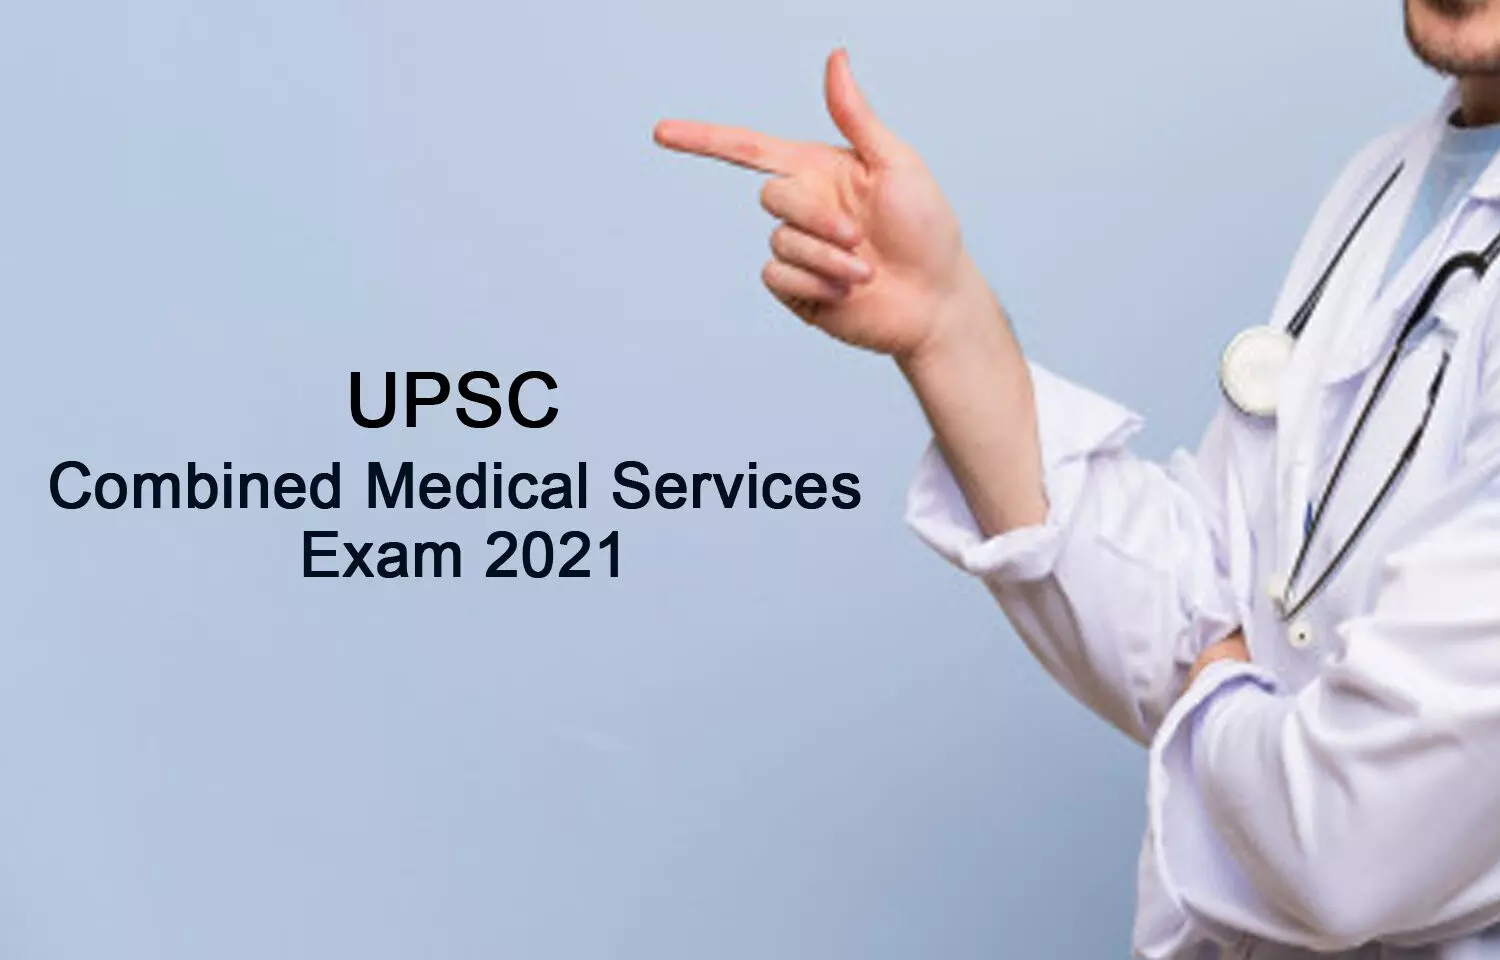 UPSC Combined Medical Services Exam 2021: View eligibility criteria, important dates, applications process, vacancies, all exam details here